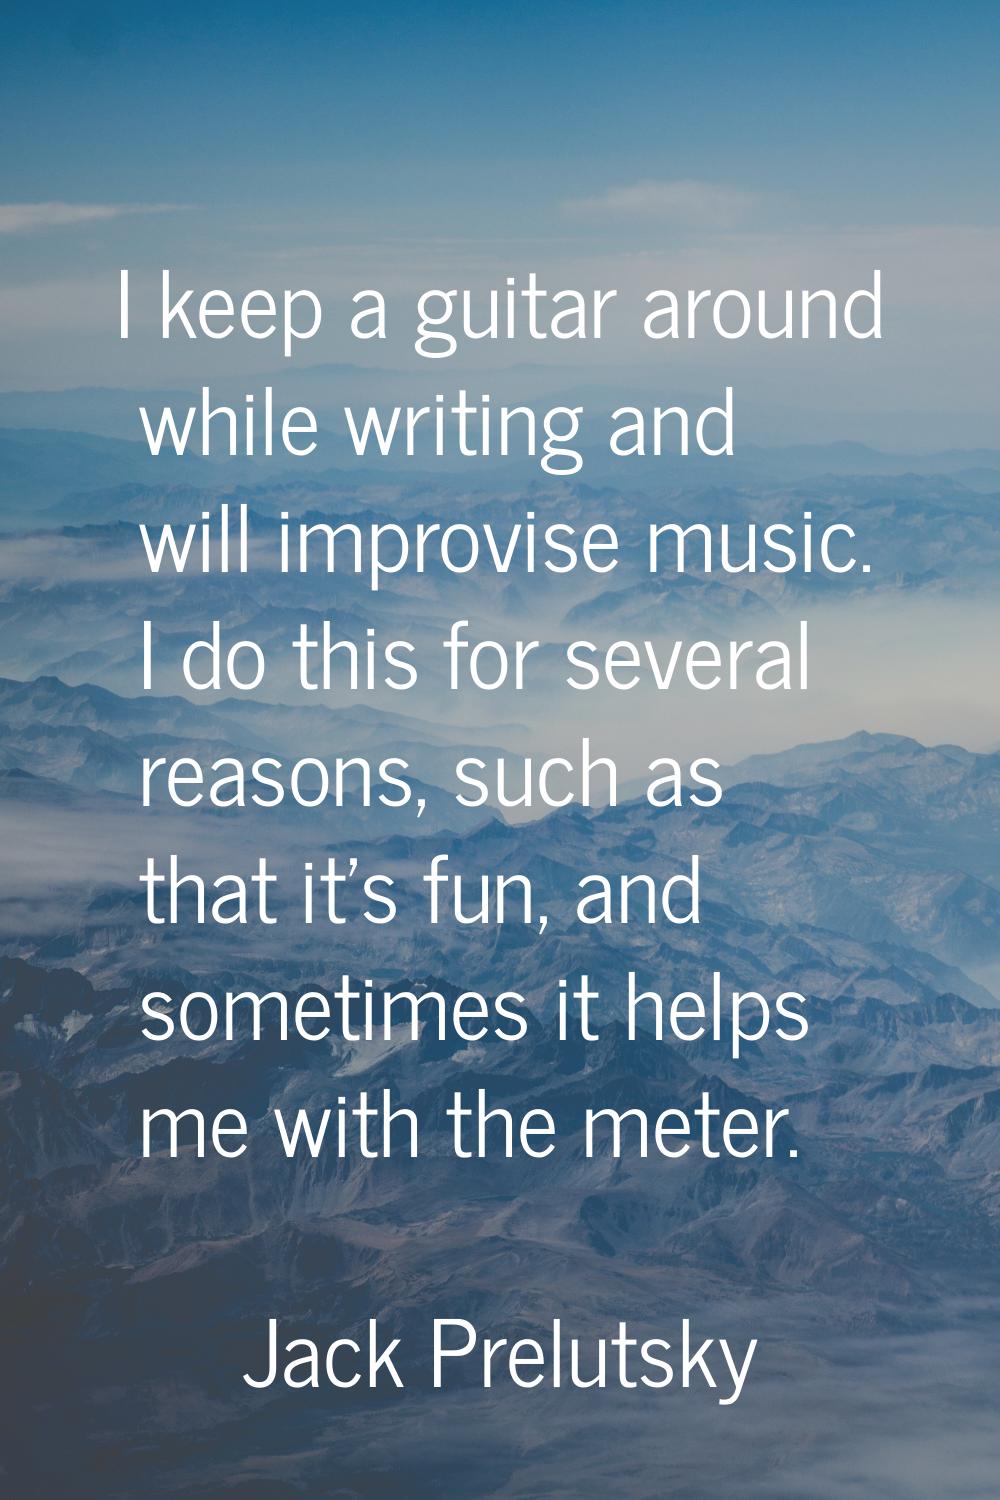 I keep a guitar around while writing and will improvise music. I do this for several reasons, such 